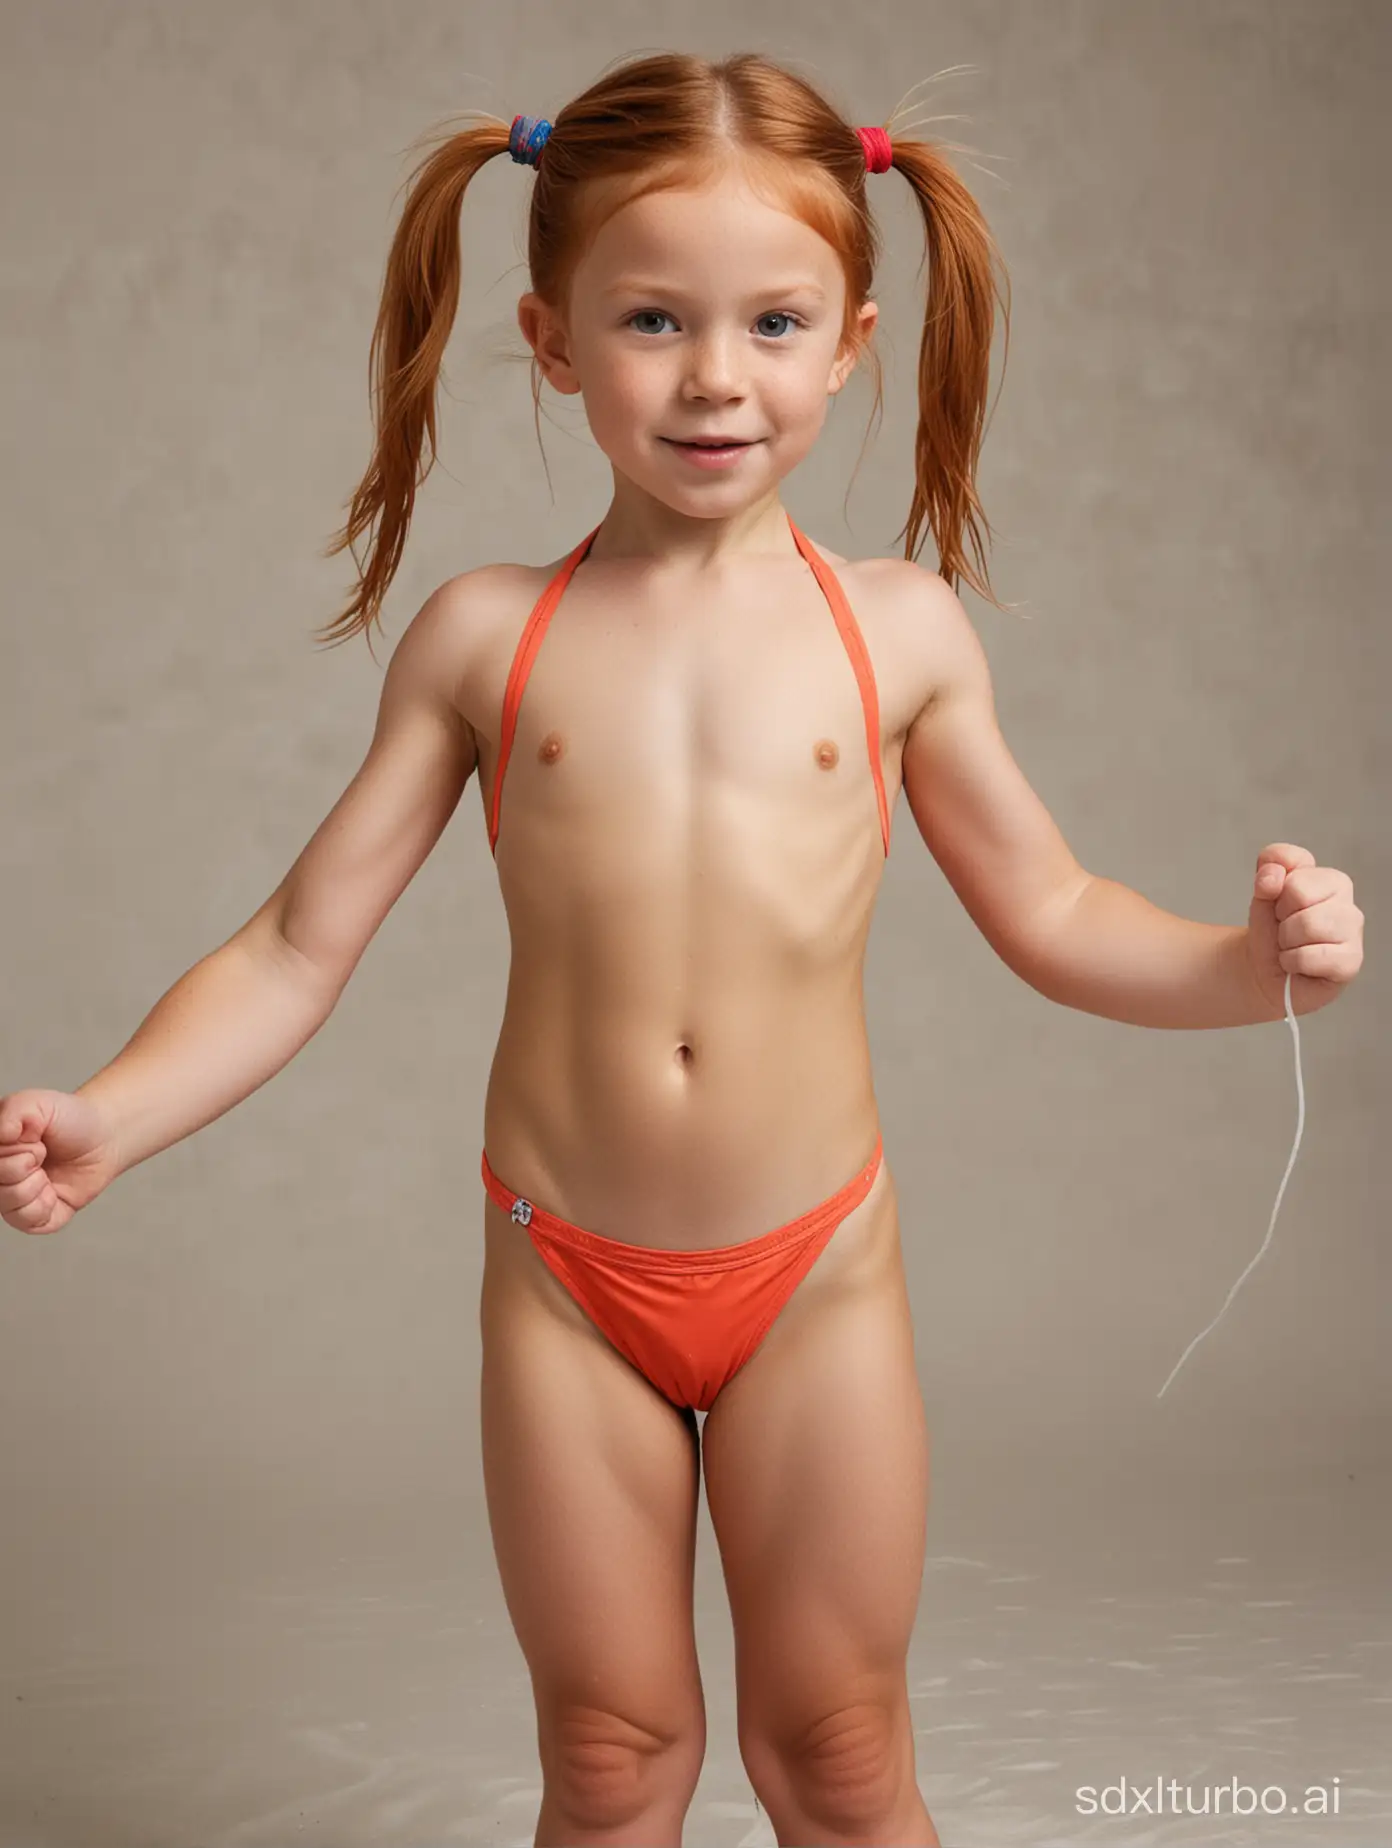 Muscular-7YearOld-GingerHaired-Girl-in-a-Vibrant-Bathing-Suit